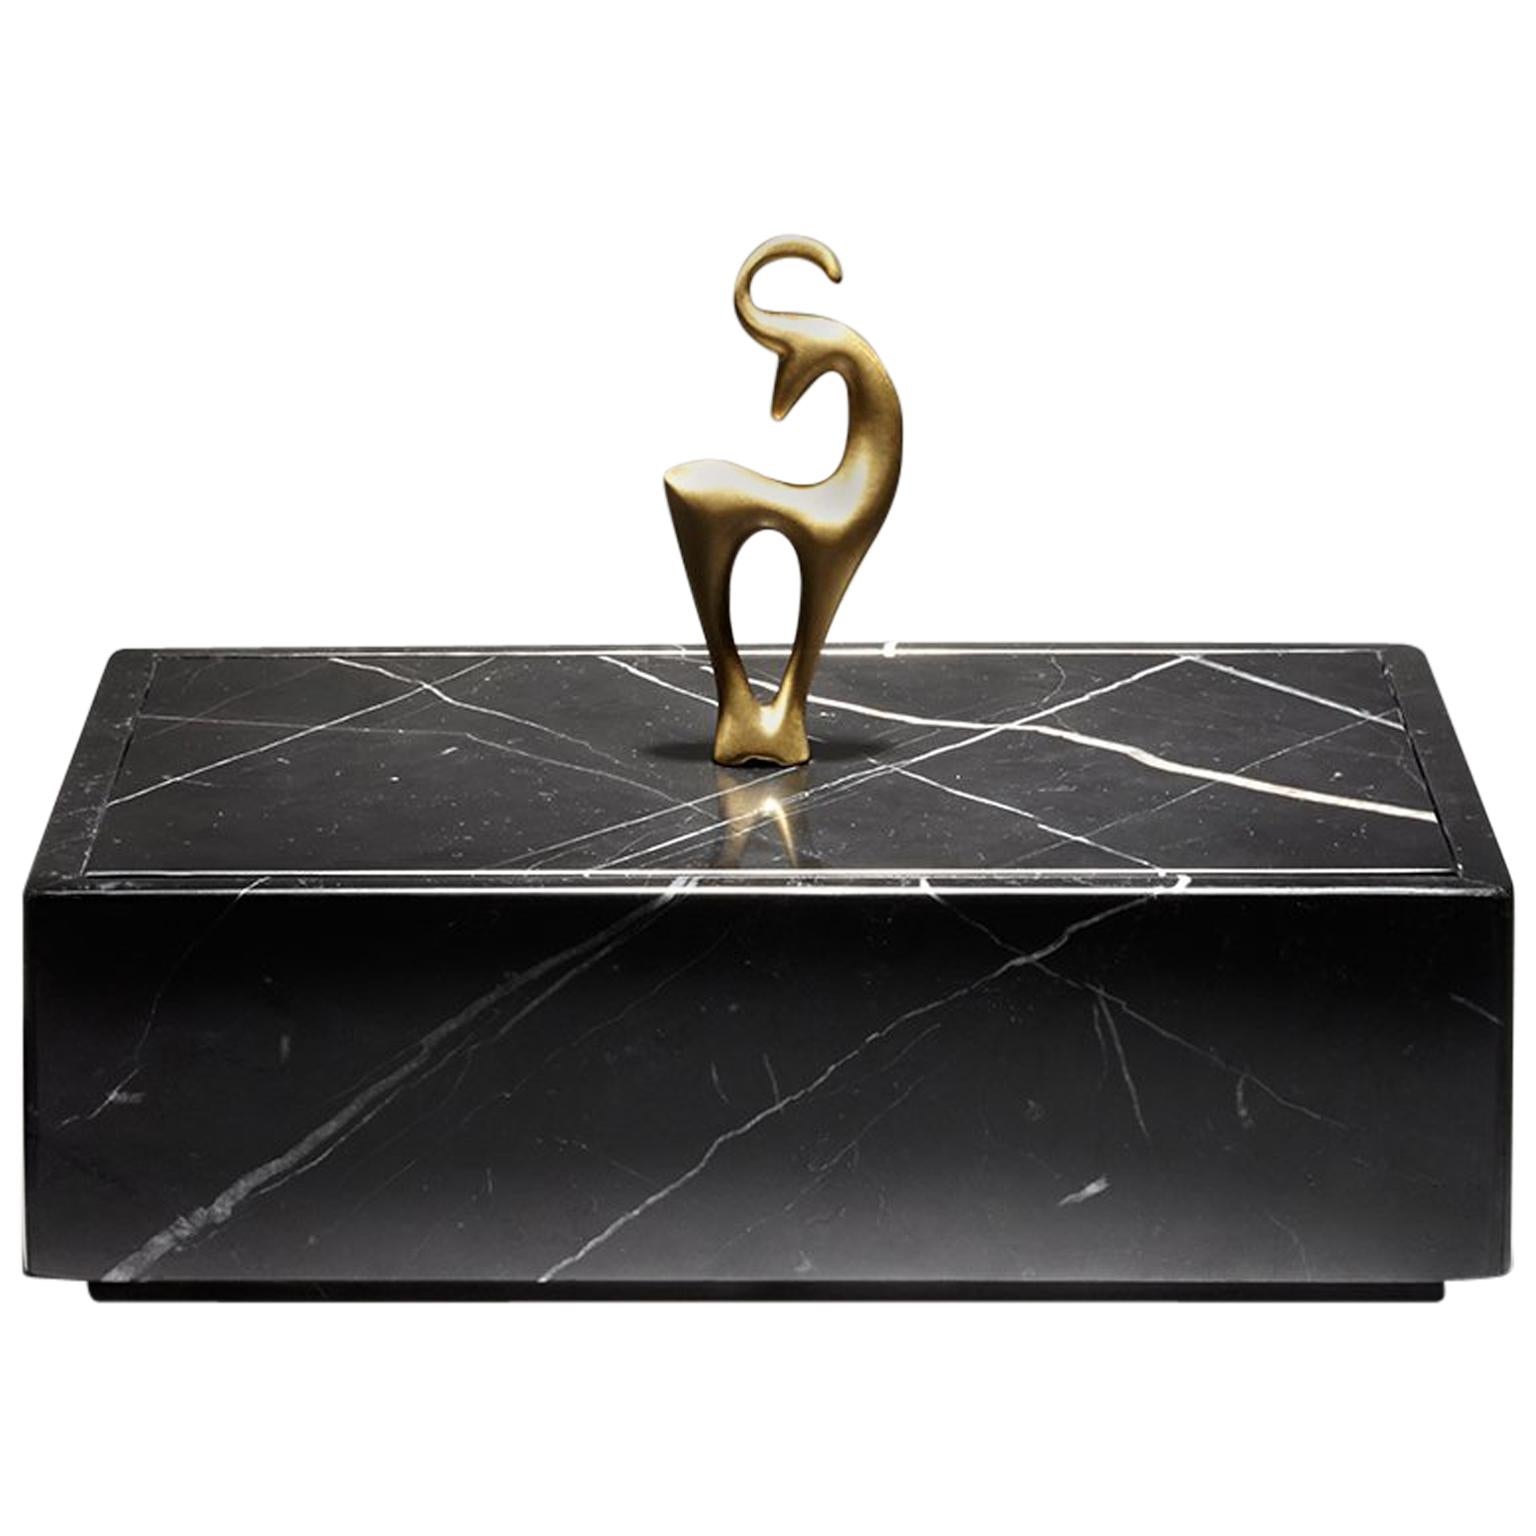 Contemporary Handmade Rectangular Box "Elaphos" Marble - Brass Handle by Anaktae For Sale